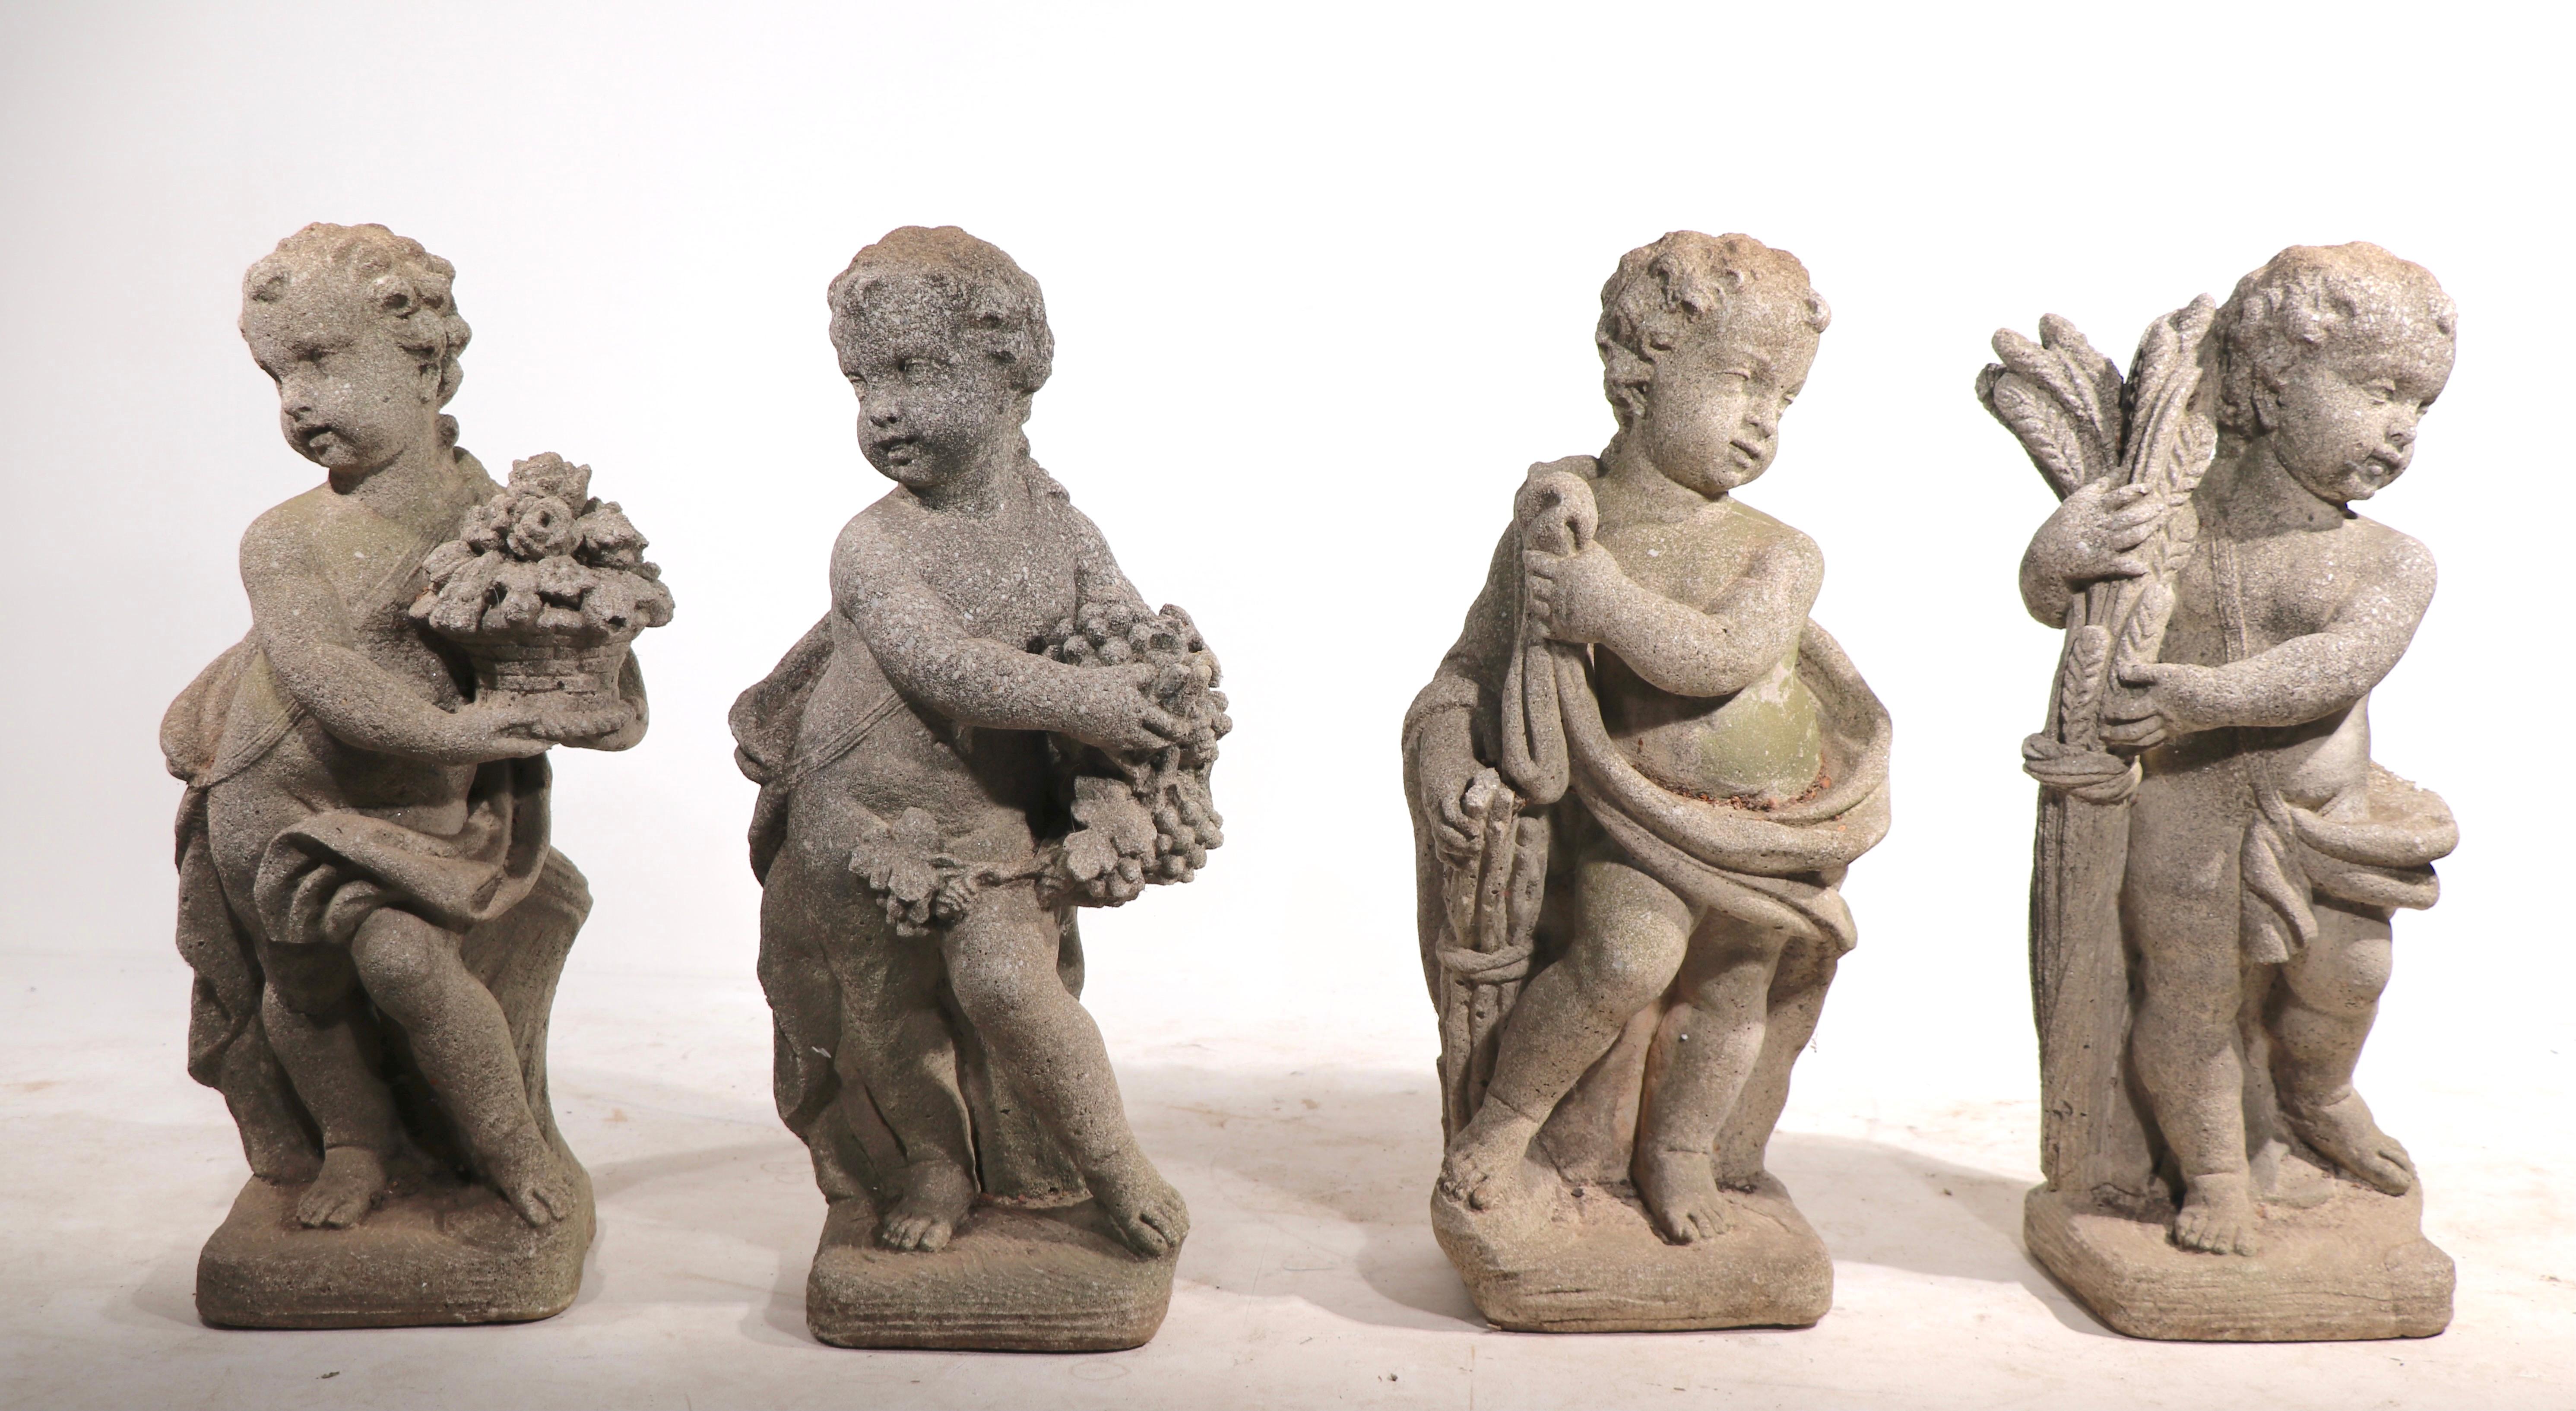 This is the listing for the second payment. 
Nice complete set of vintage cast stone garden statues depicting mythological putti form representations of the four seasons. All four are in very good original condition, all have a charming organic